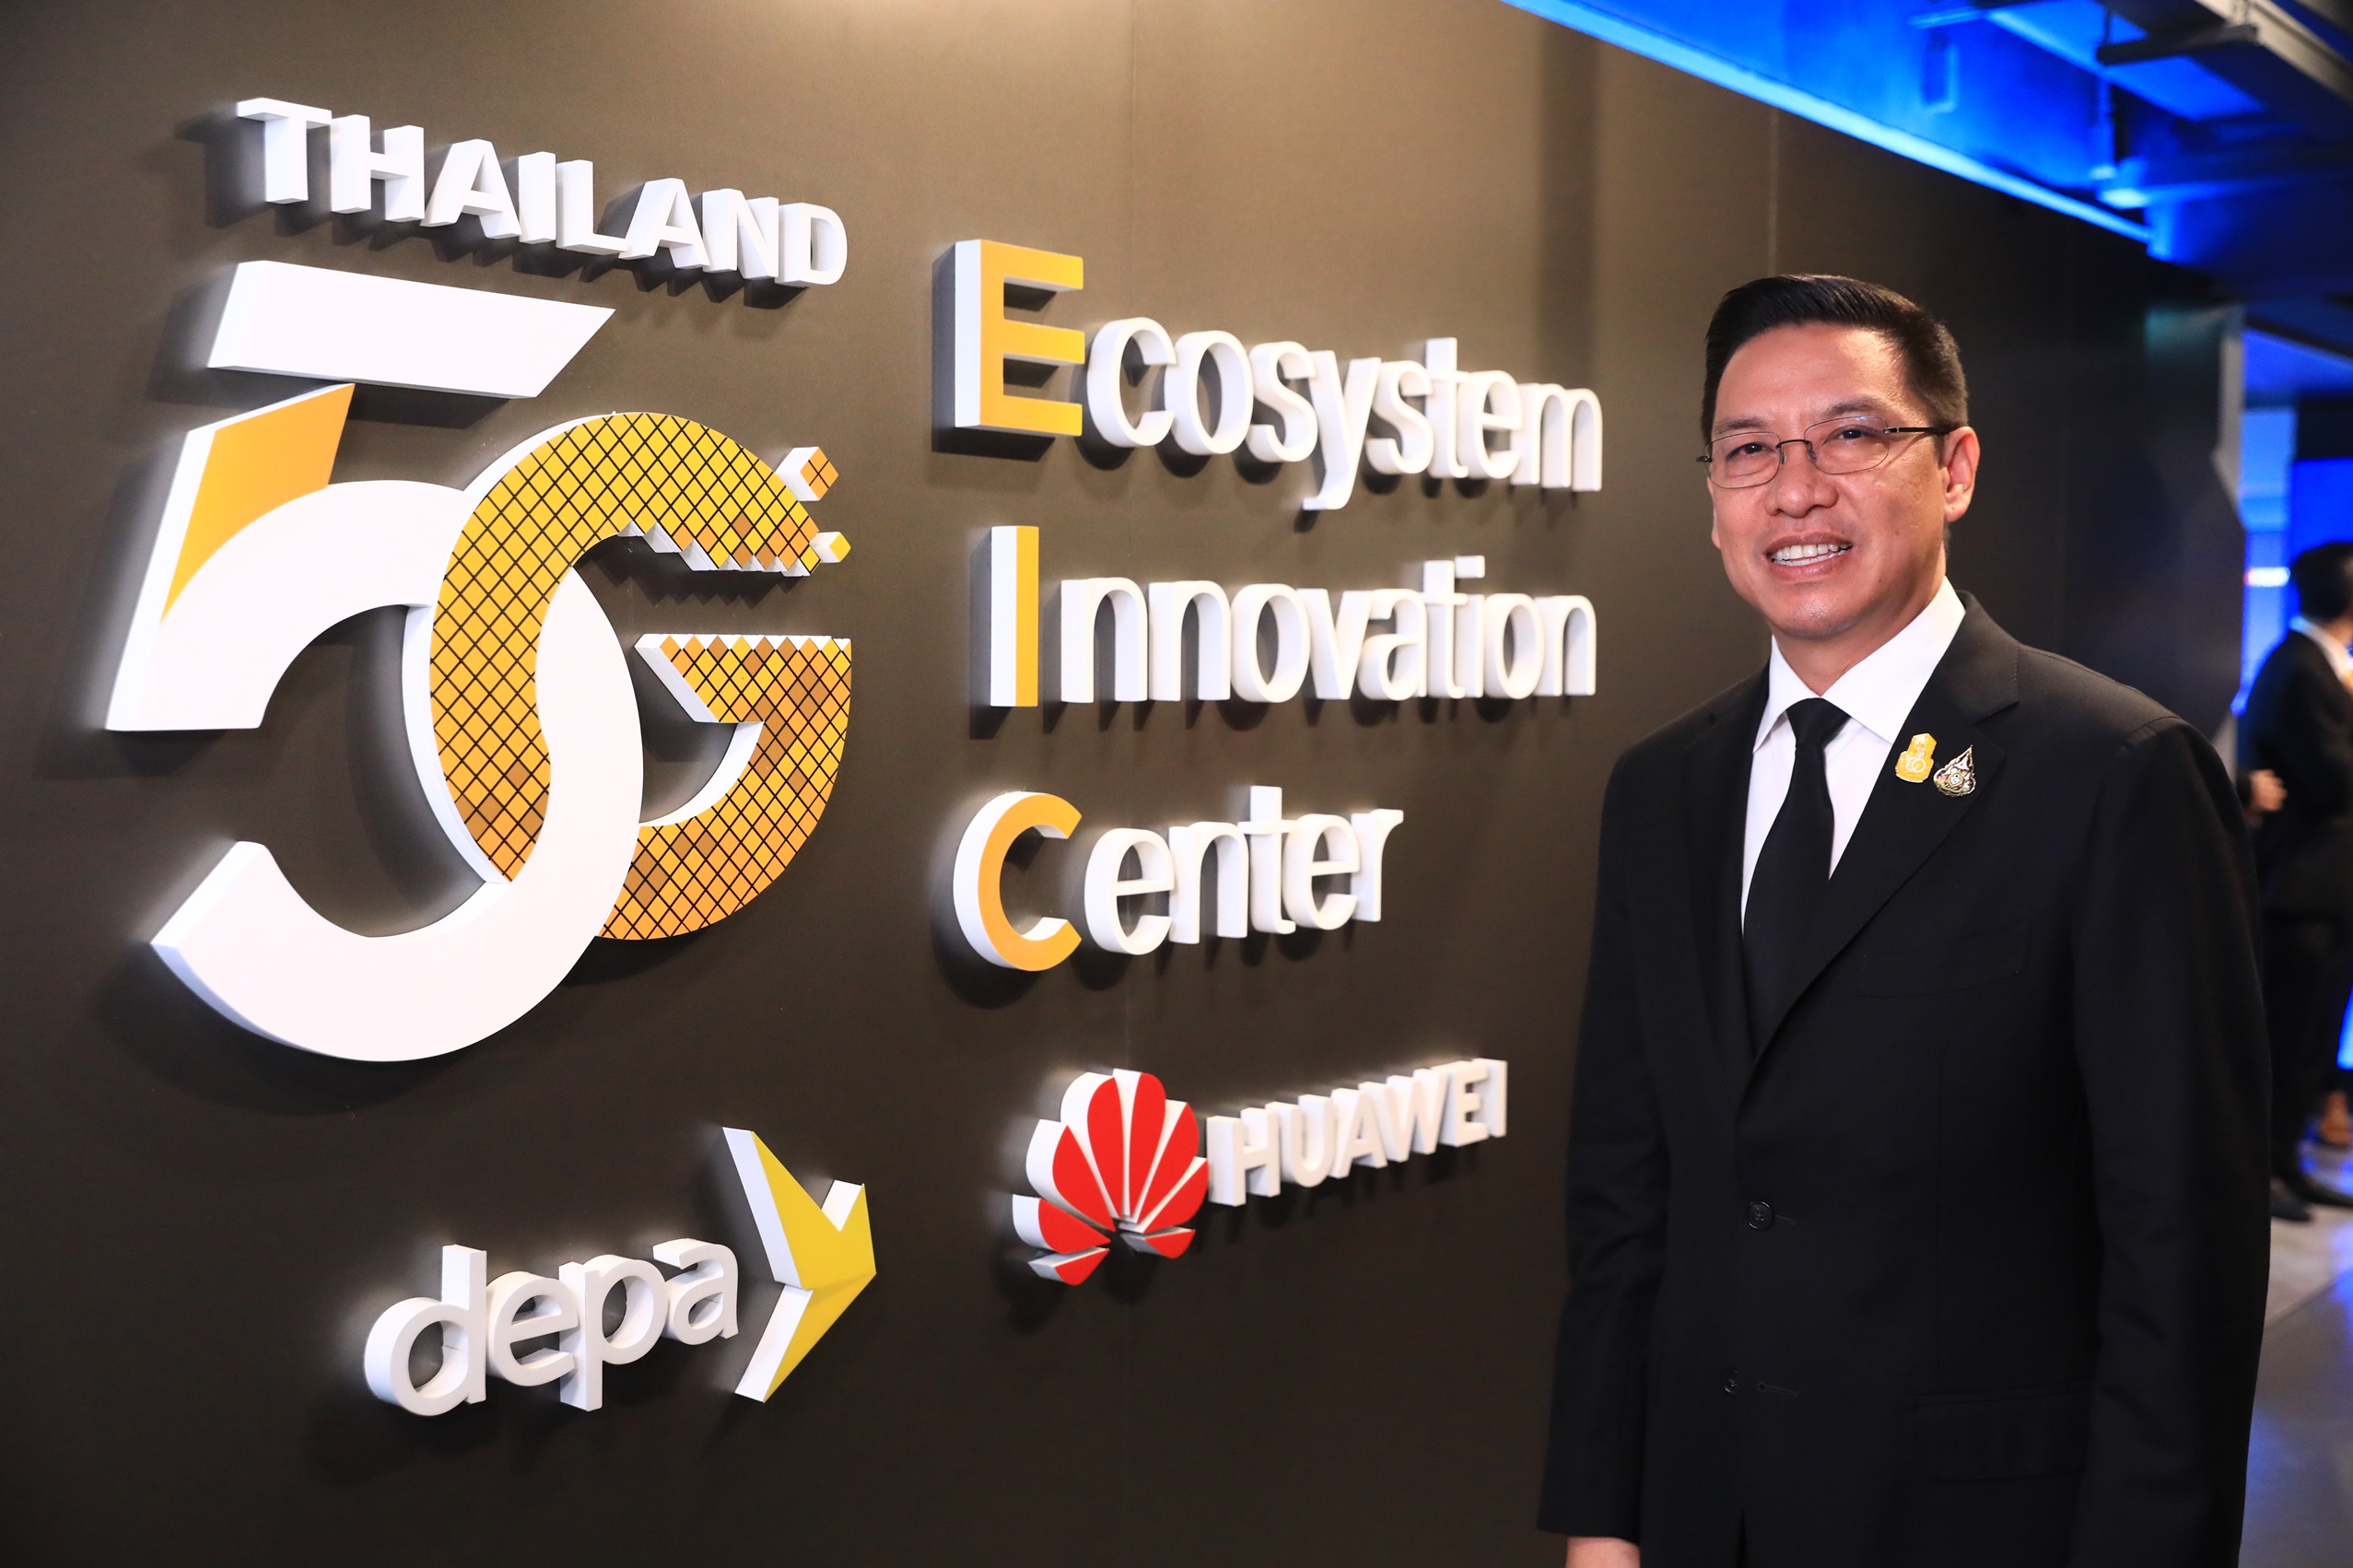 Thailand MDES-depa, Huawei open 5G Ecosystem Innovation Center to boost digital transformation